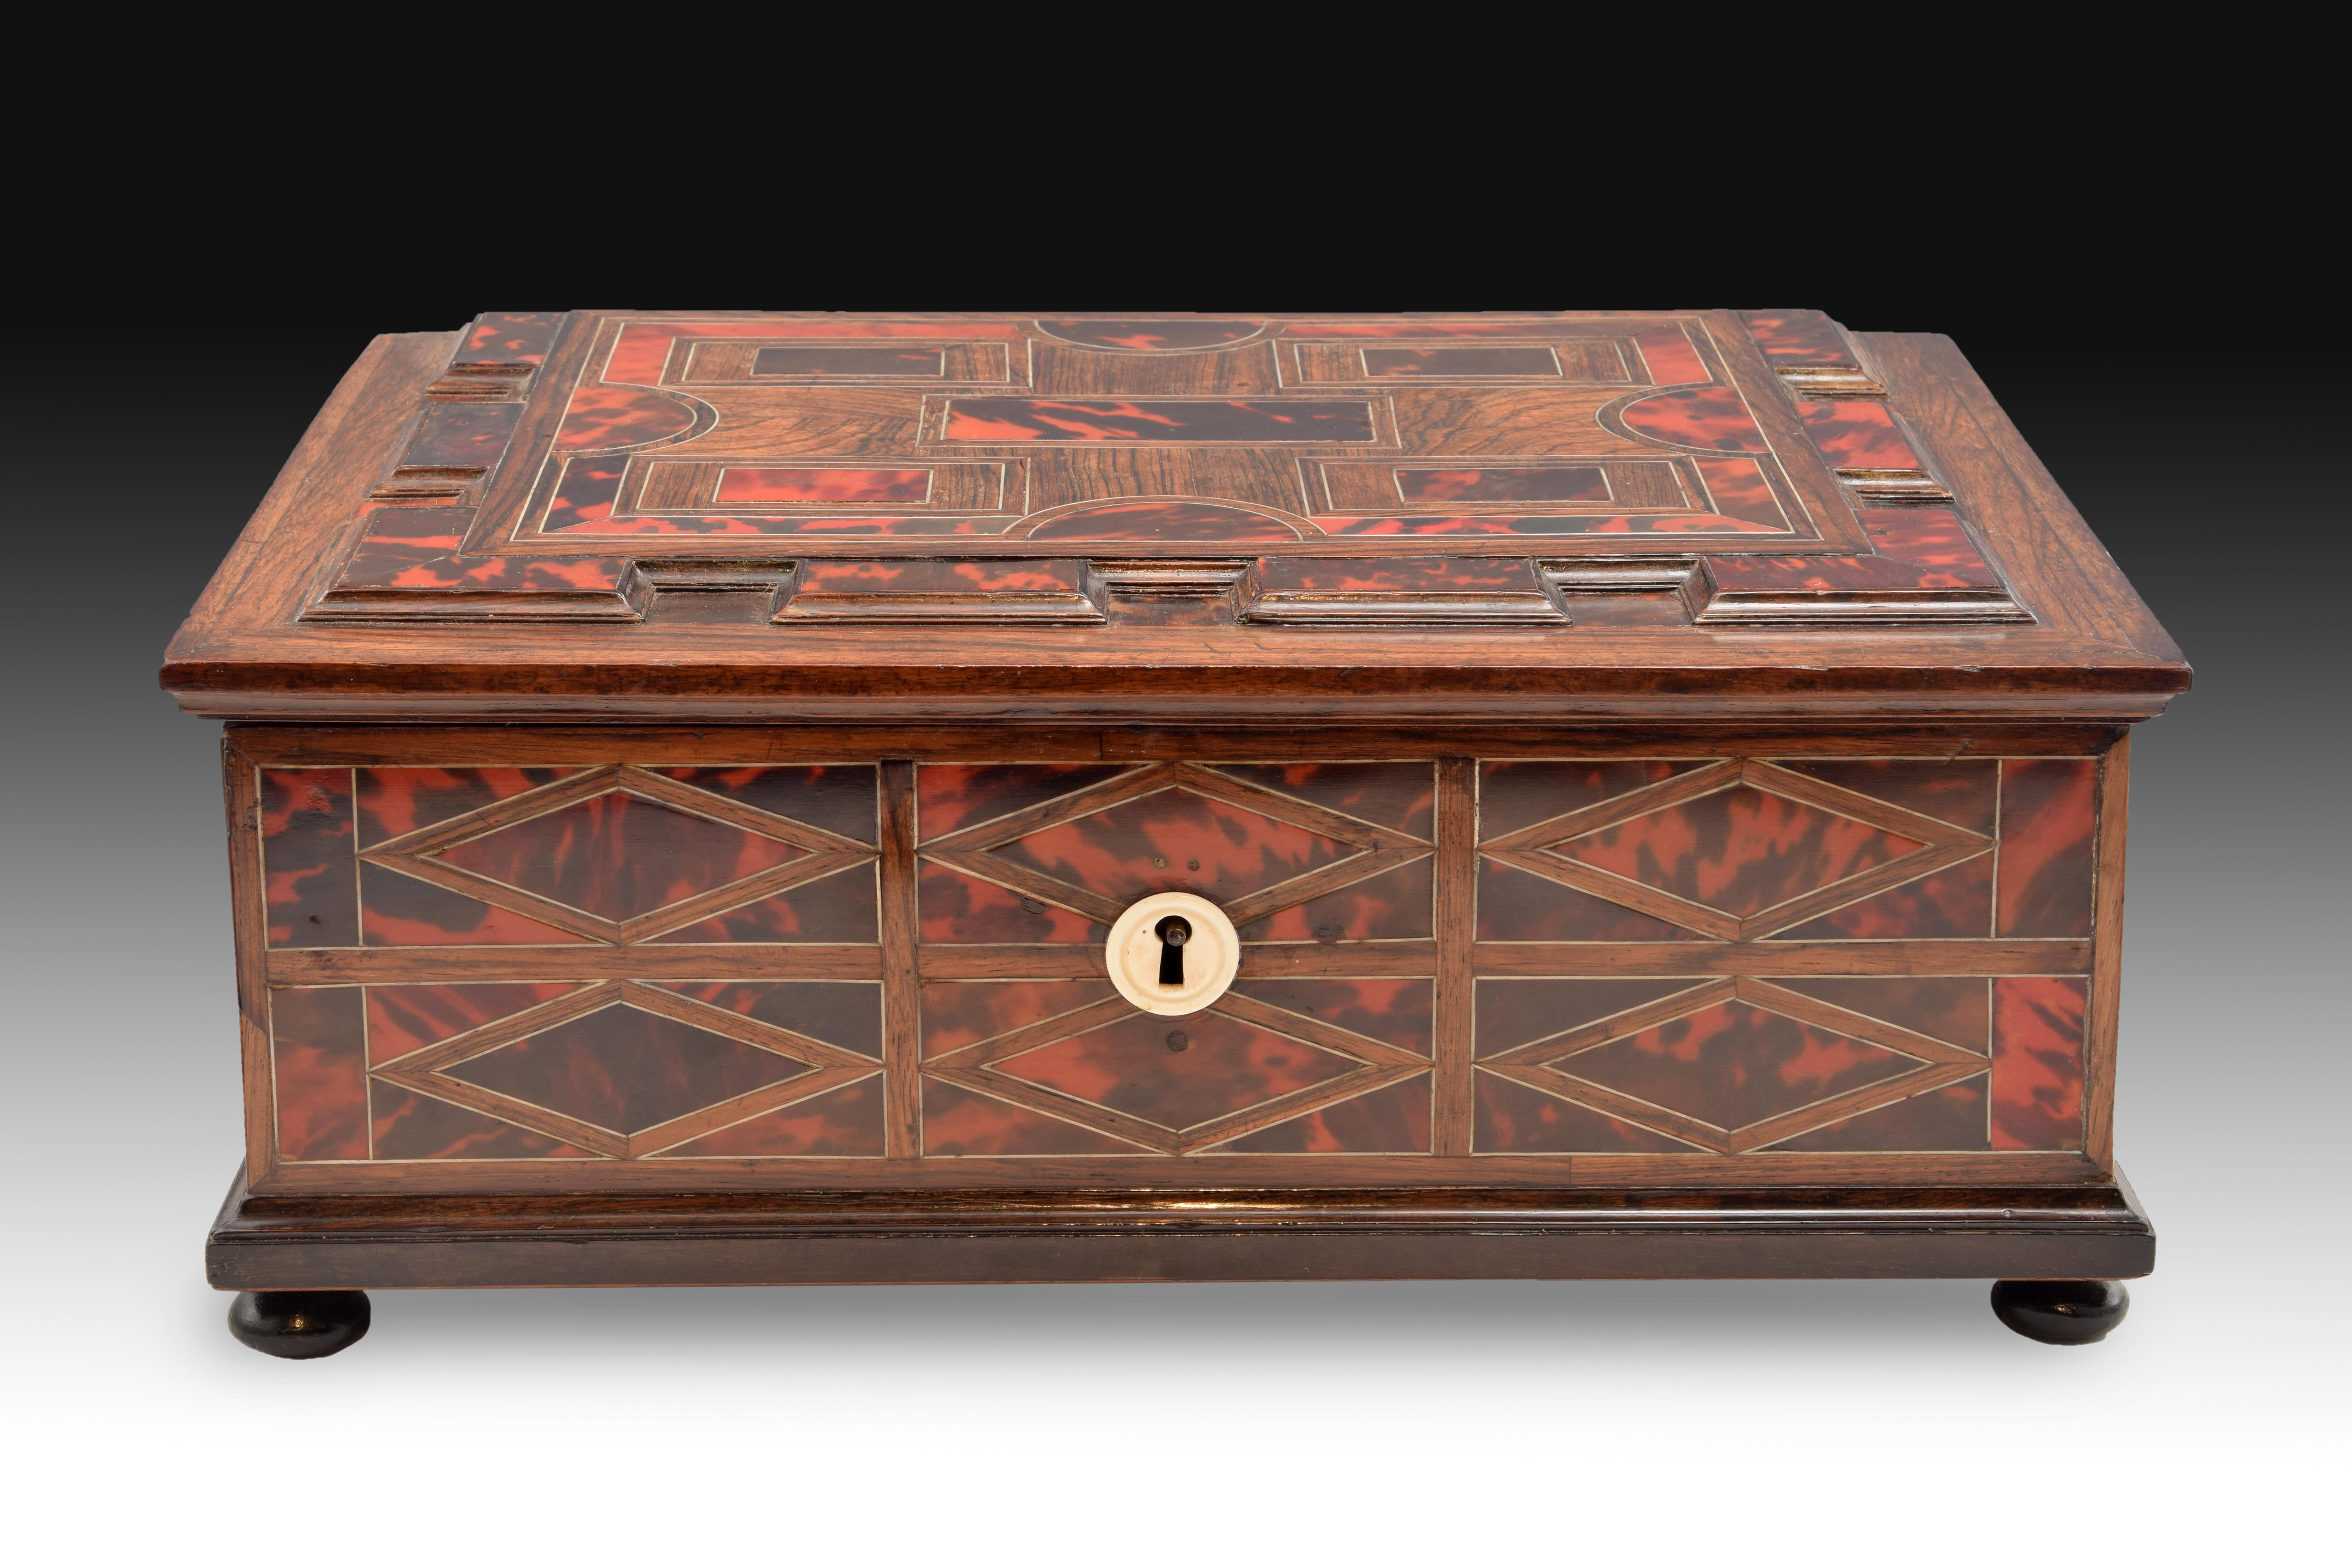 Rectangular casket with a flat lid that stands on small disc-shaped legs and has a simple lock shield on the front (key lock). The exterior is decorated with a combination of wood and tortoiseshell plates drawing simple geometric compositions,